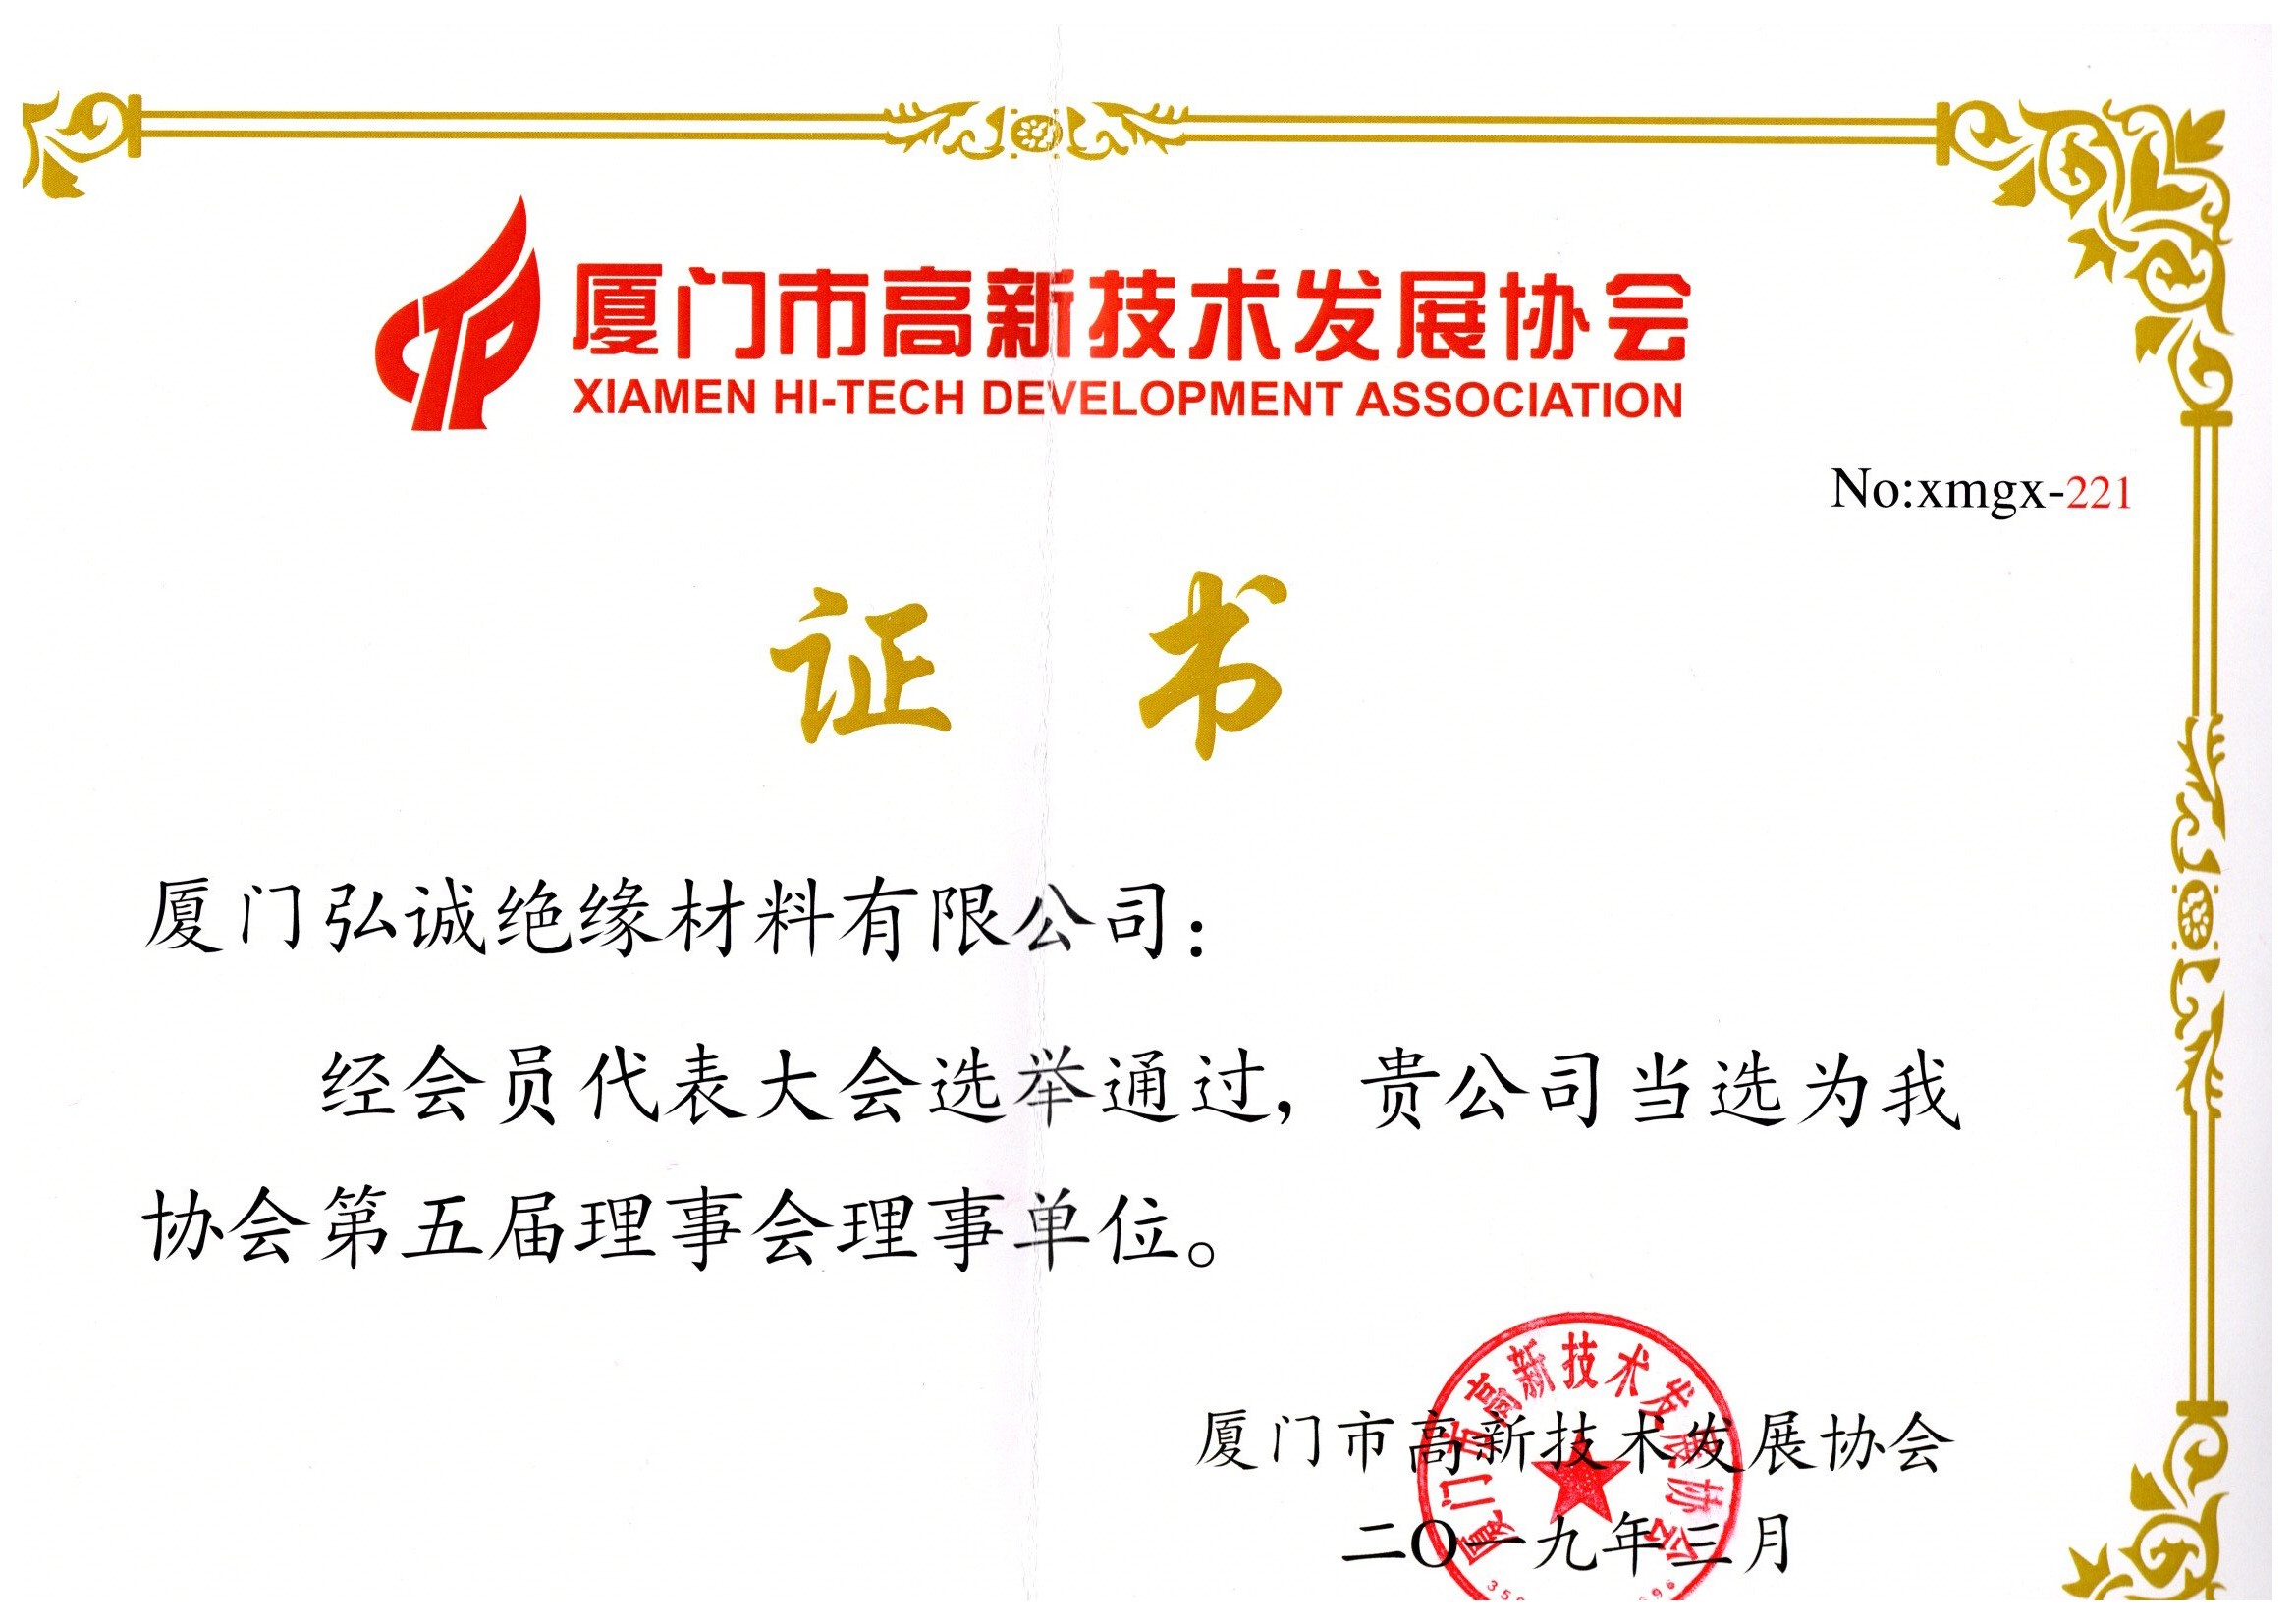 Director Unit of Xiamen Association for the development of new and high technologies